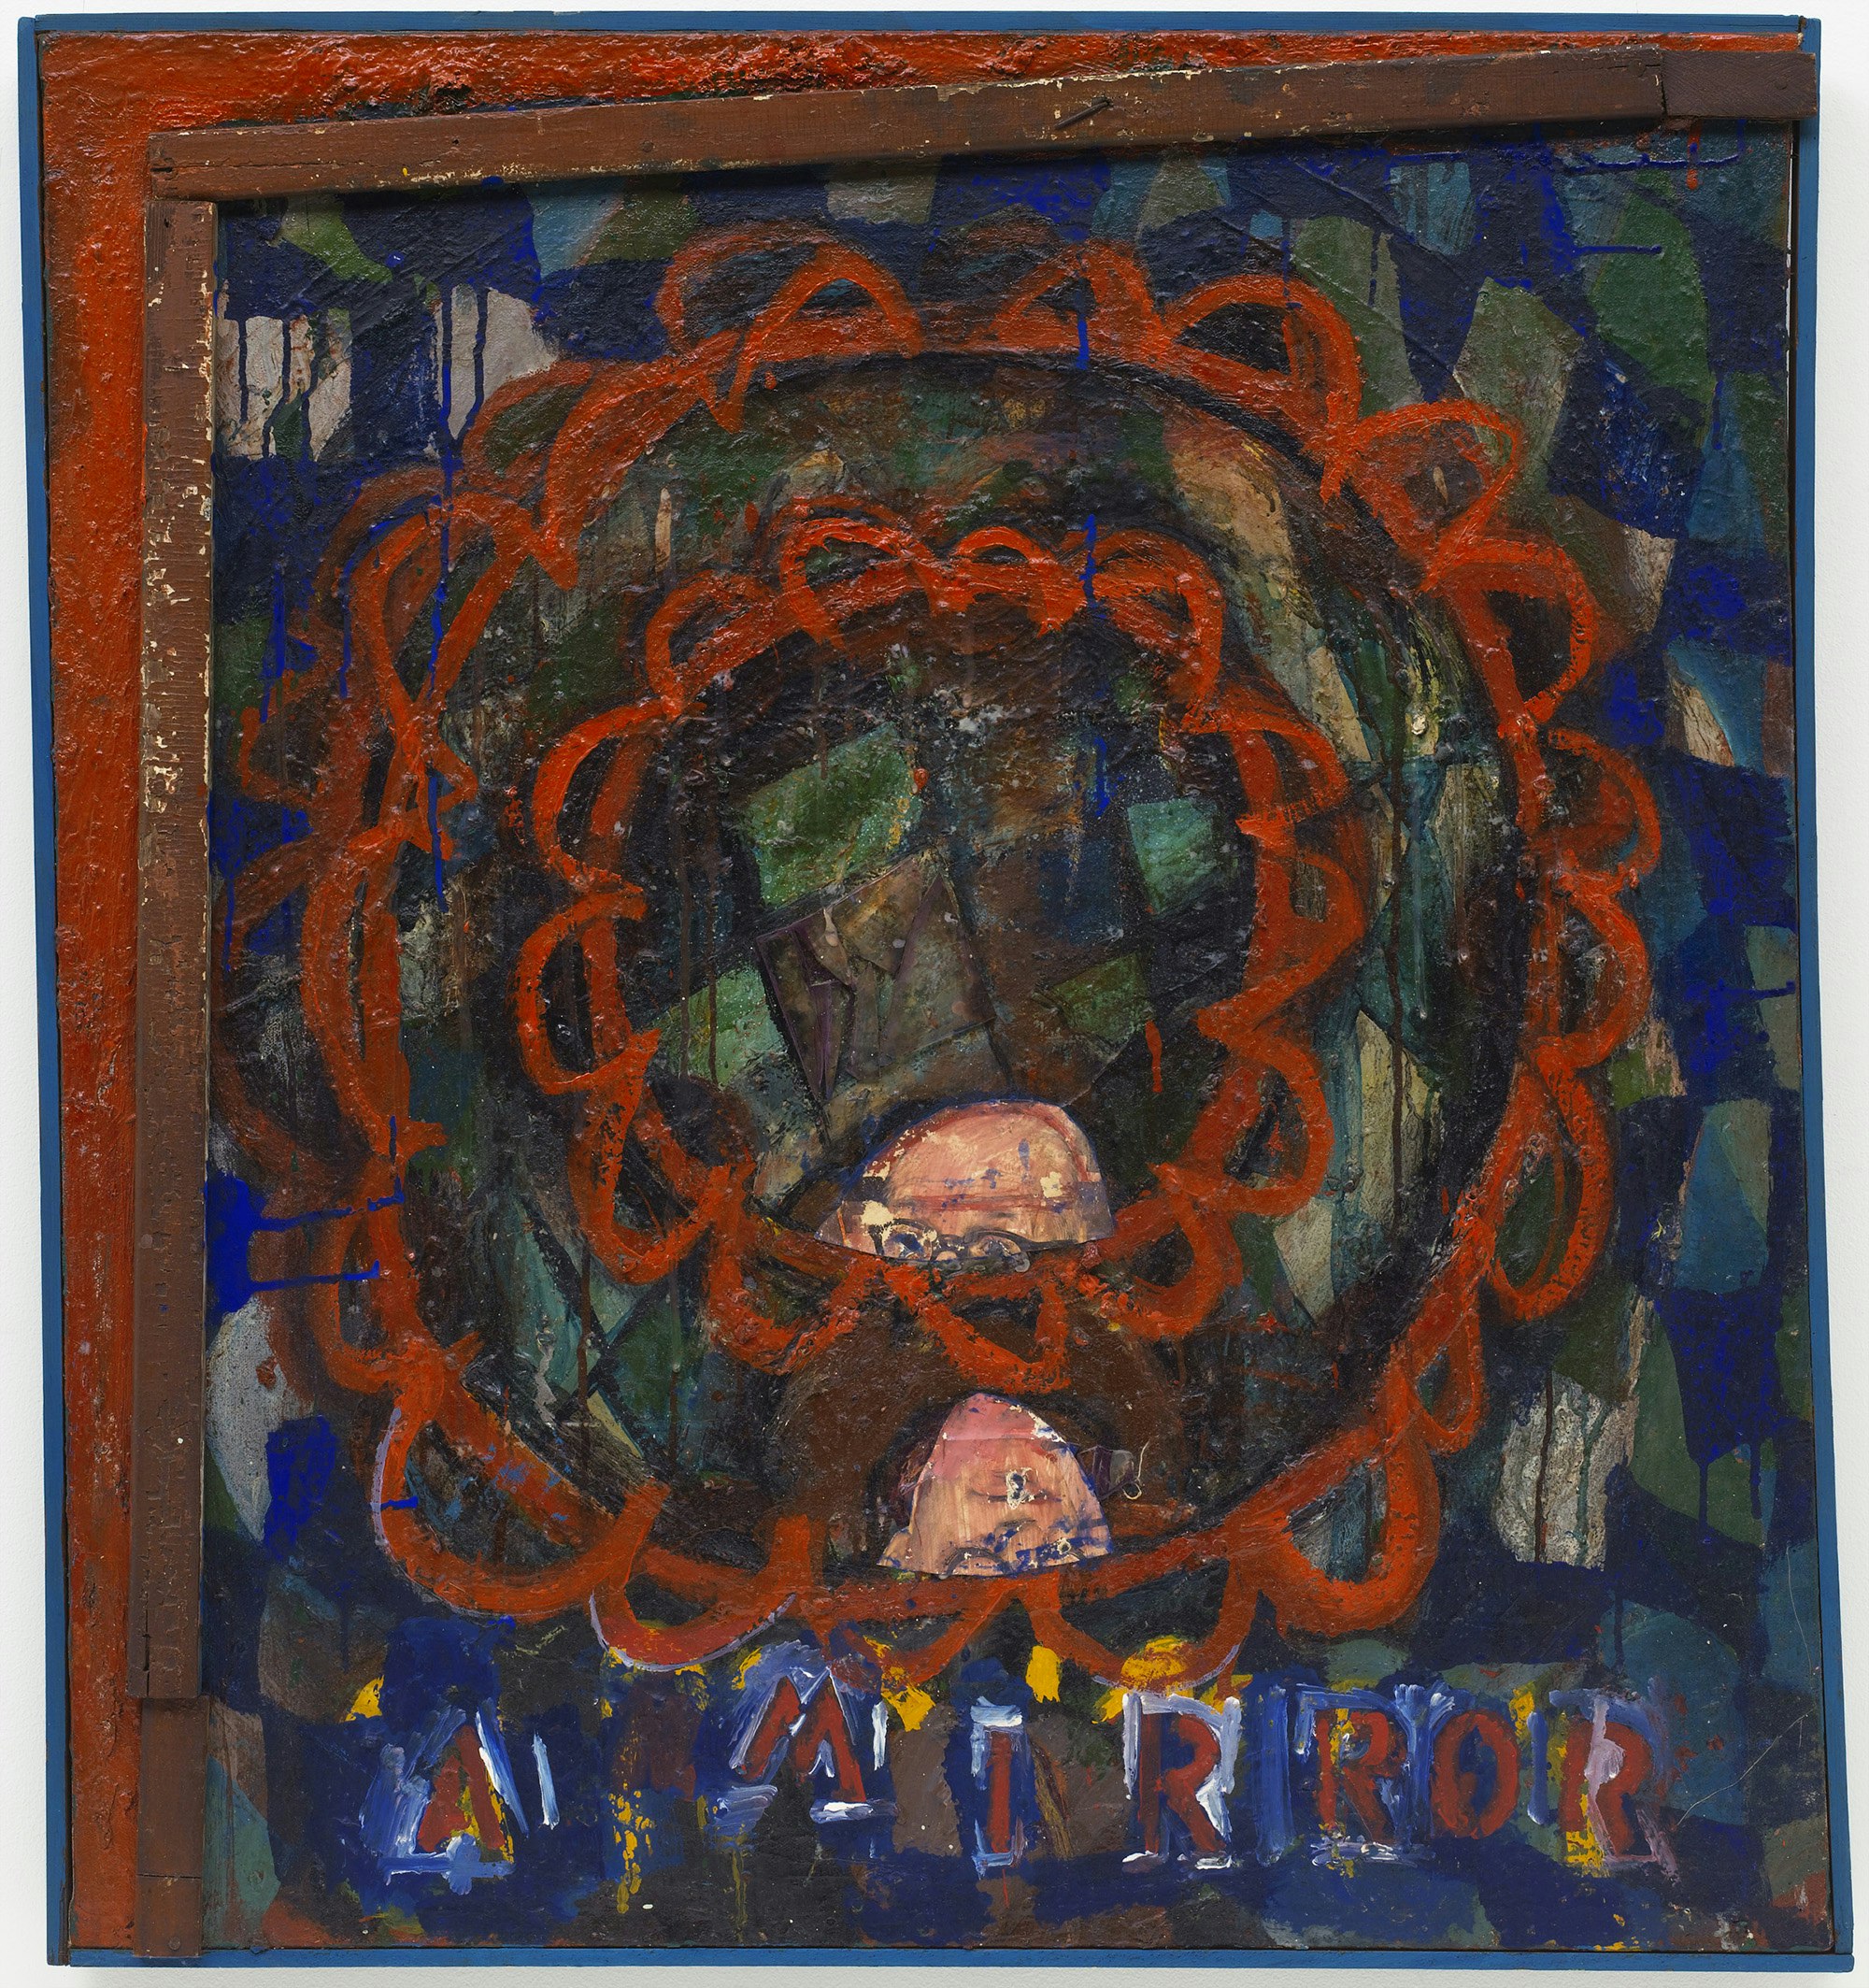 Elizabeth Murray, <em>A Mirror</em>, 1963-64. Oil on canvas with shard of glass in artist's hand painted frame, 33 1/4 x 31 x 1 1/4 inches. © The Murray-Holman Family Trust / Artists Rights Society (ARS), New York.